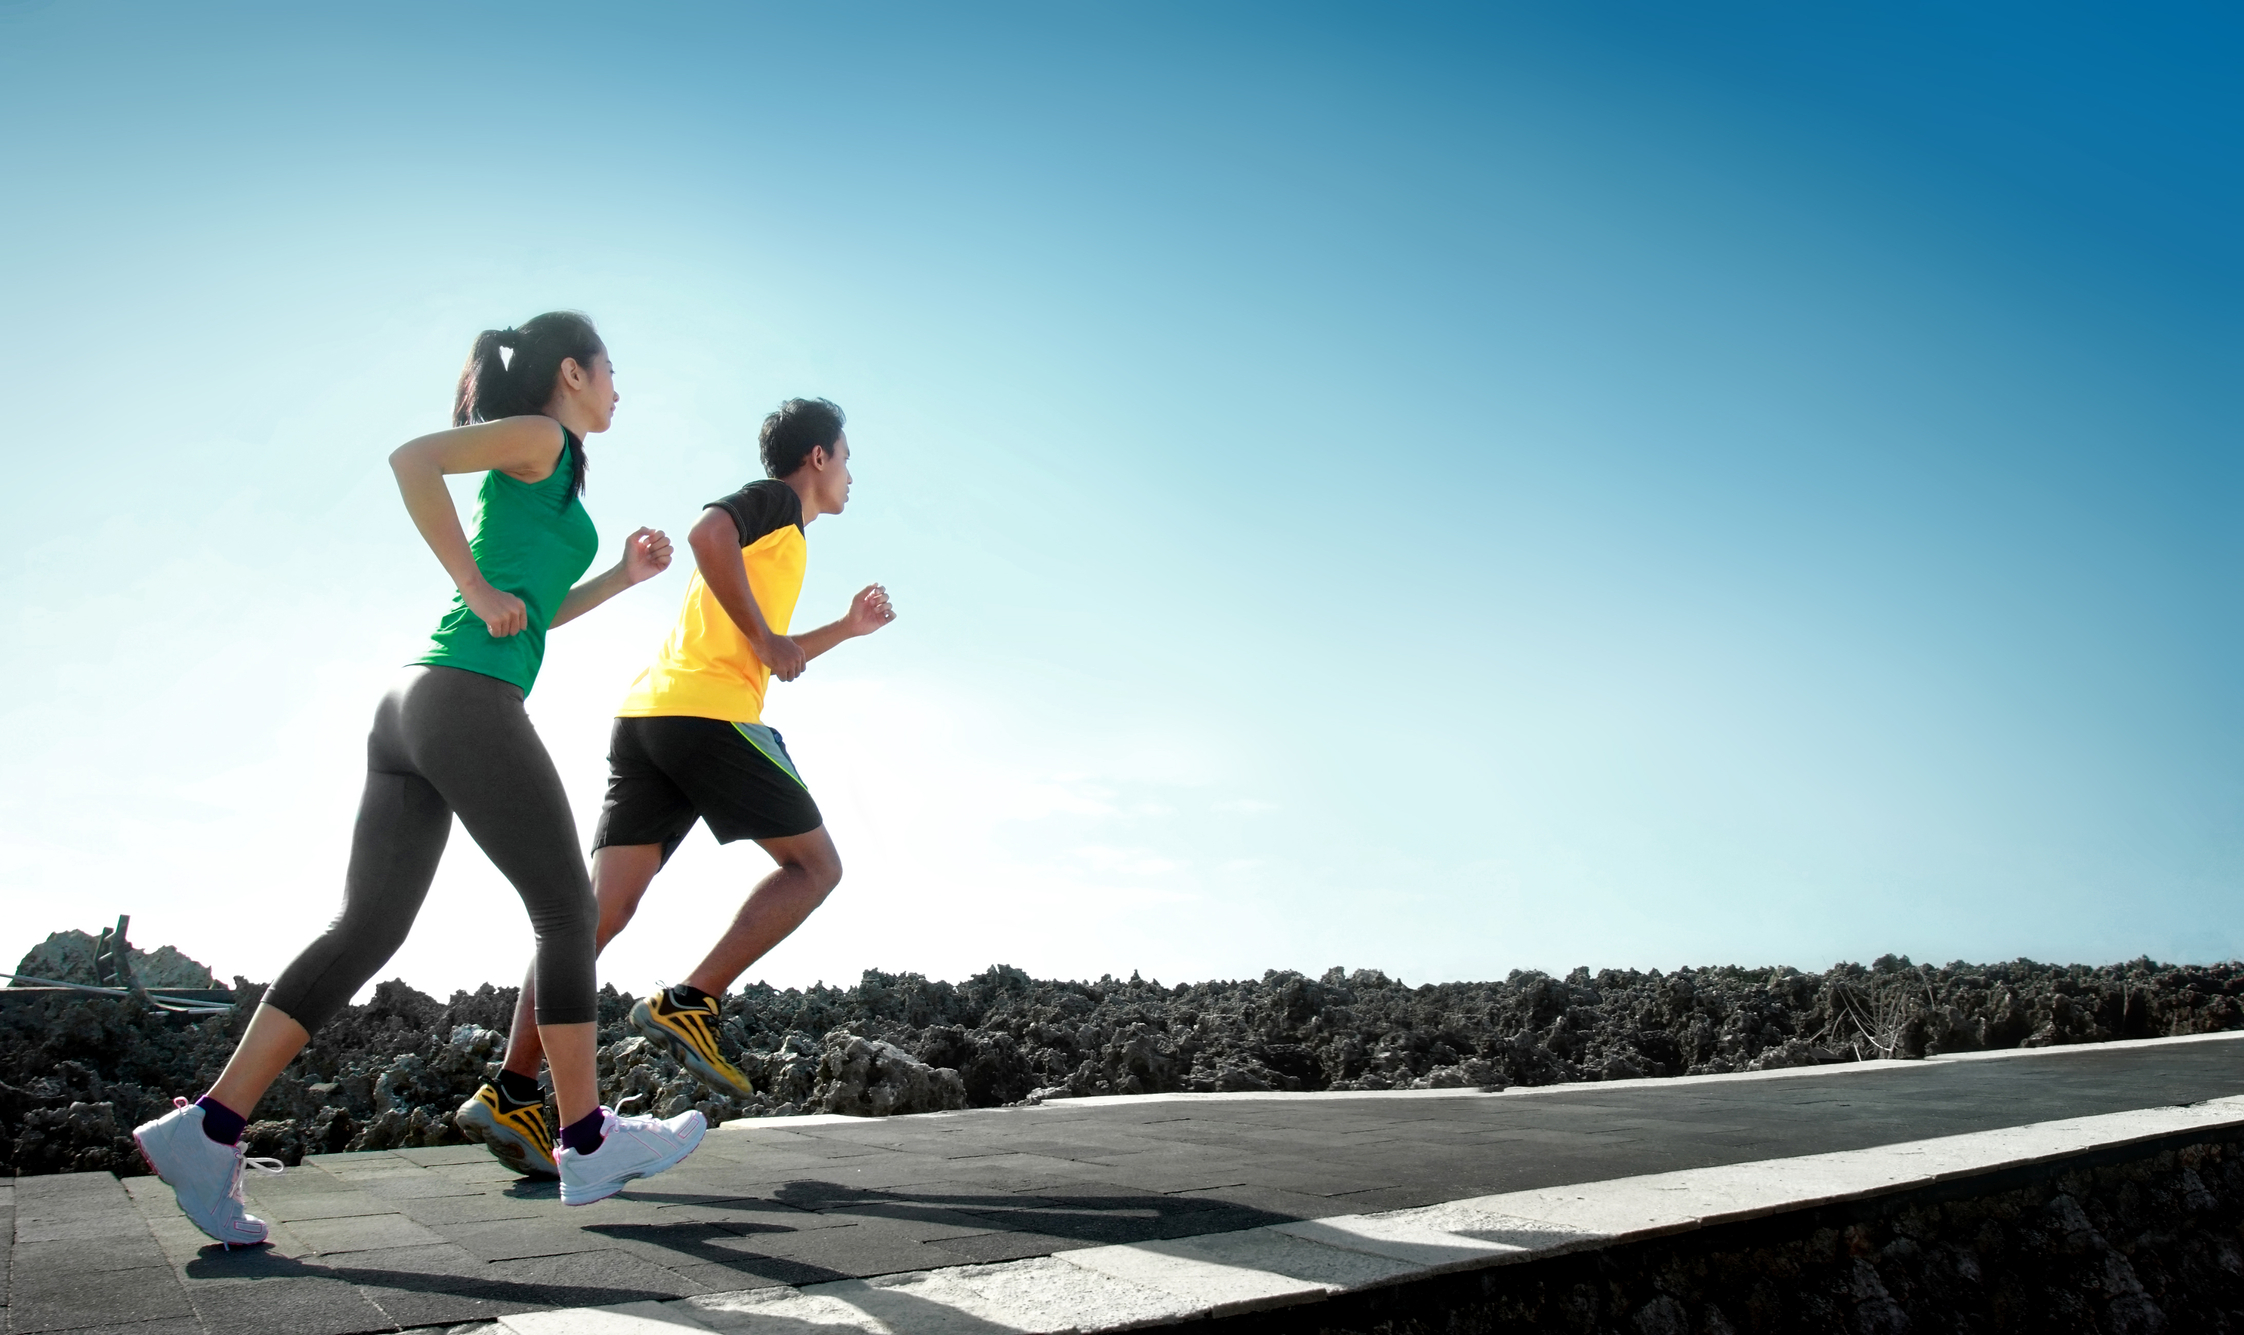 Combine interval training with outdoor activities to get more out of your workout.